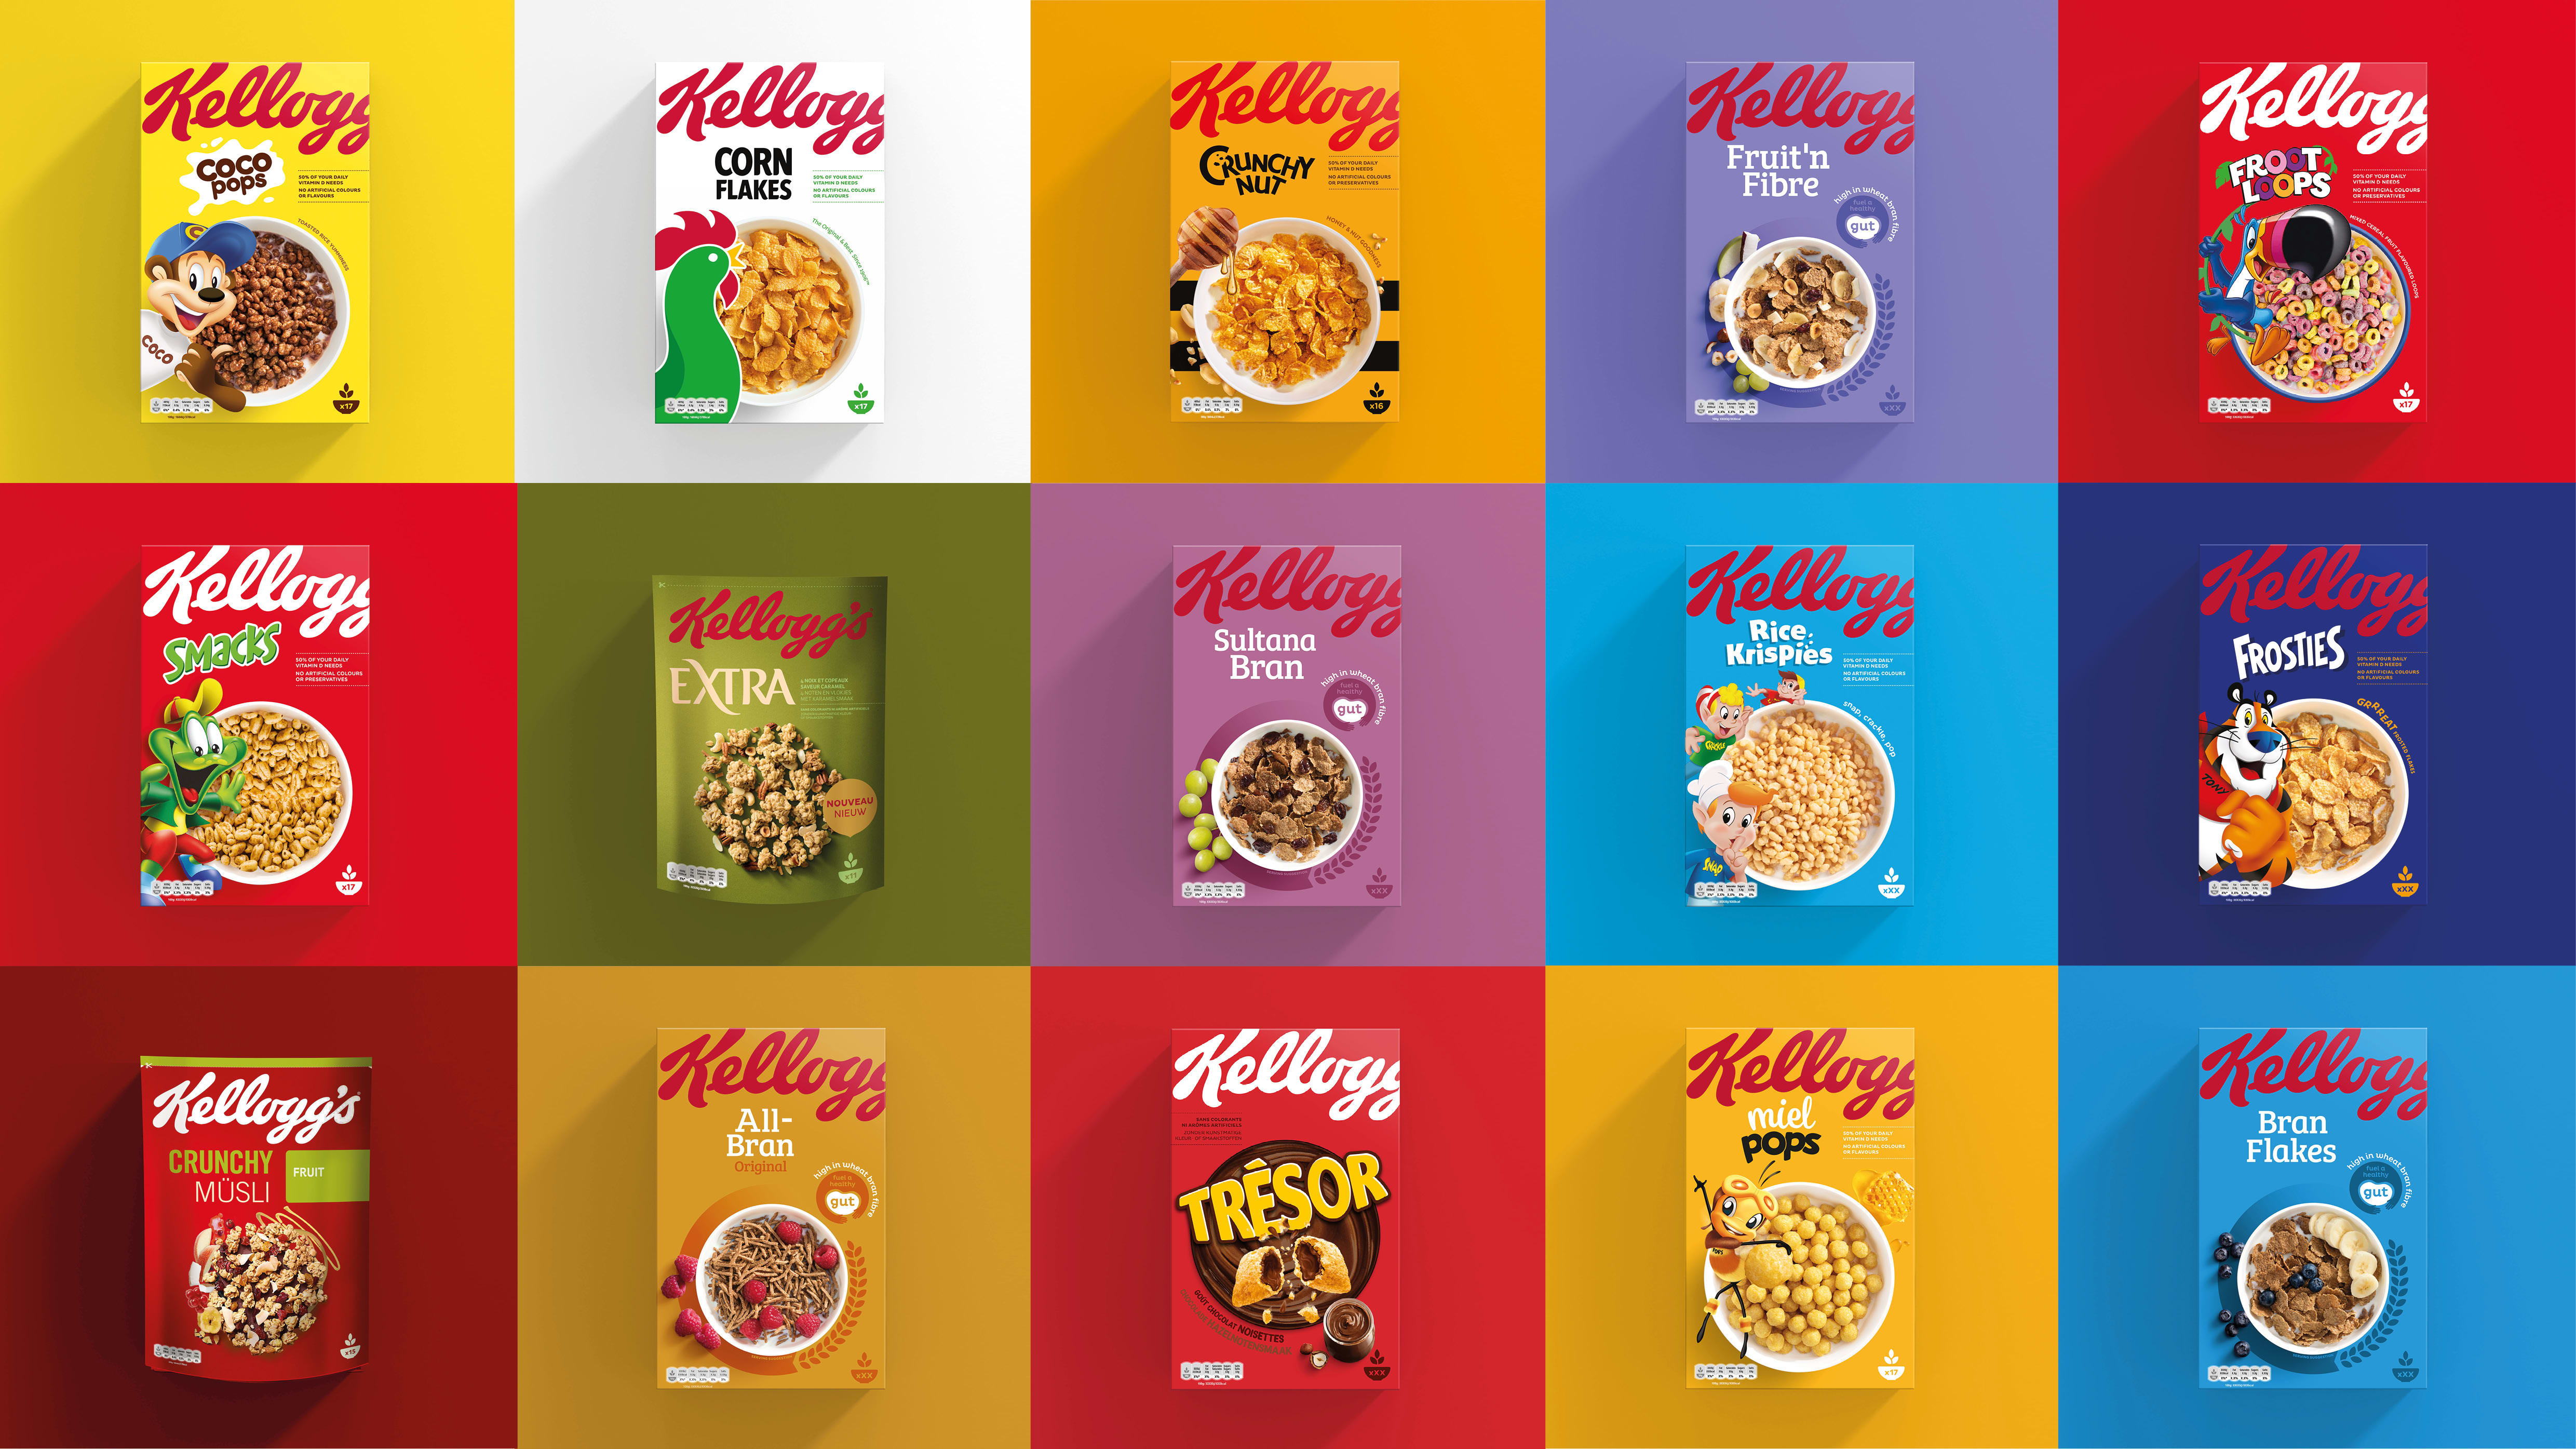 Kellogg redesigns its cereal boxes in Europe to reflect 'naturalness'